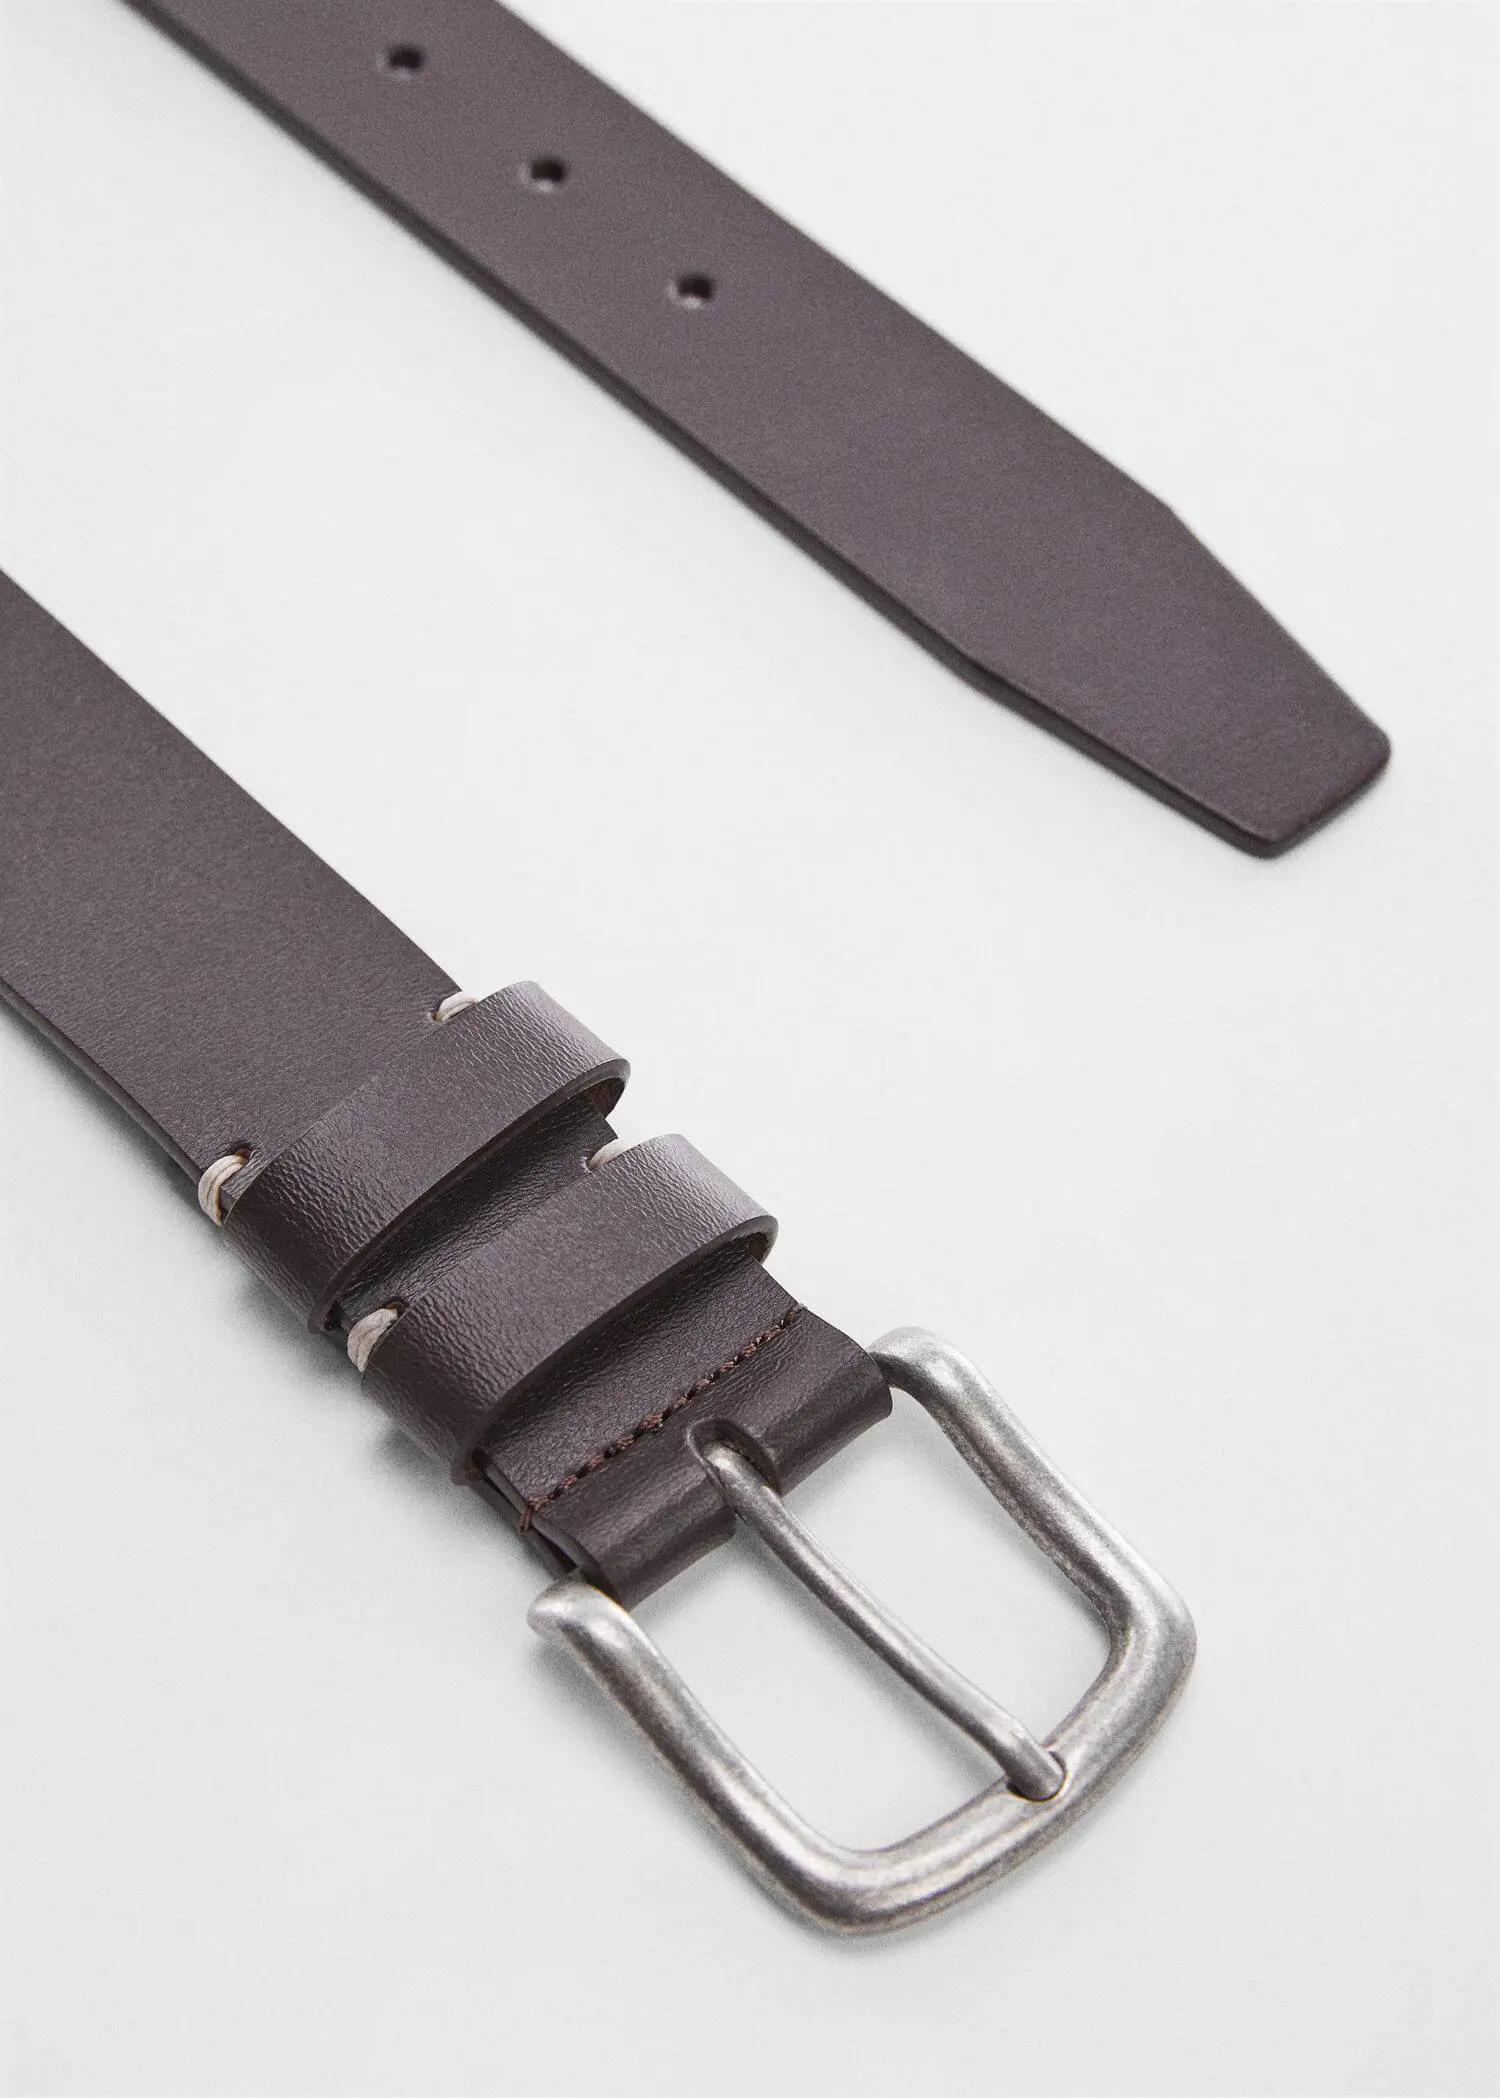 Mango Buckle leather belt. a close-up of a brown leather belt with a silver buckle. 